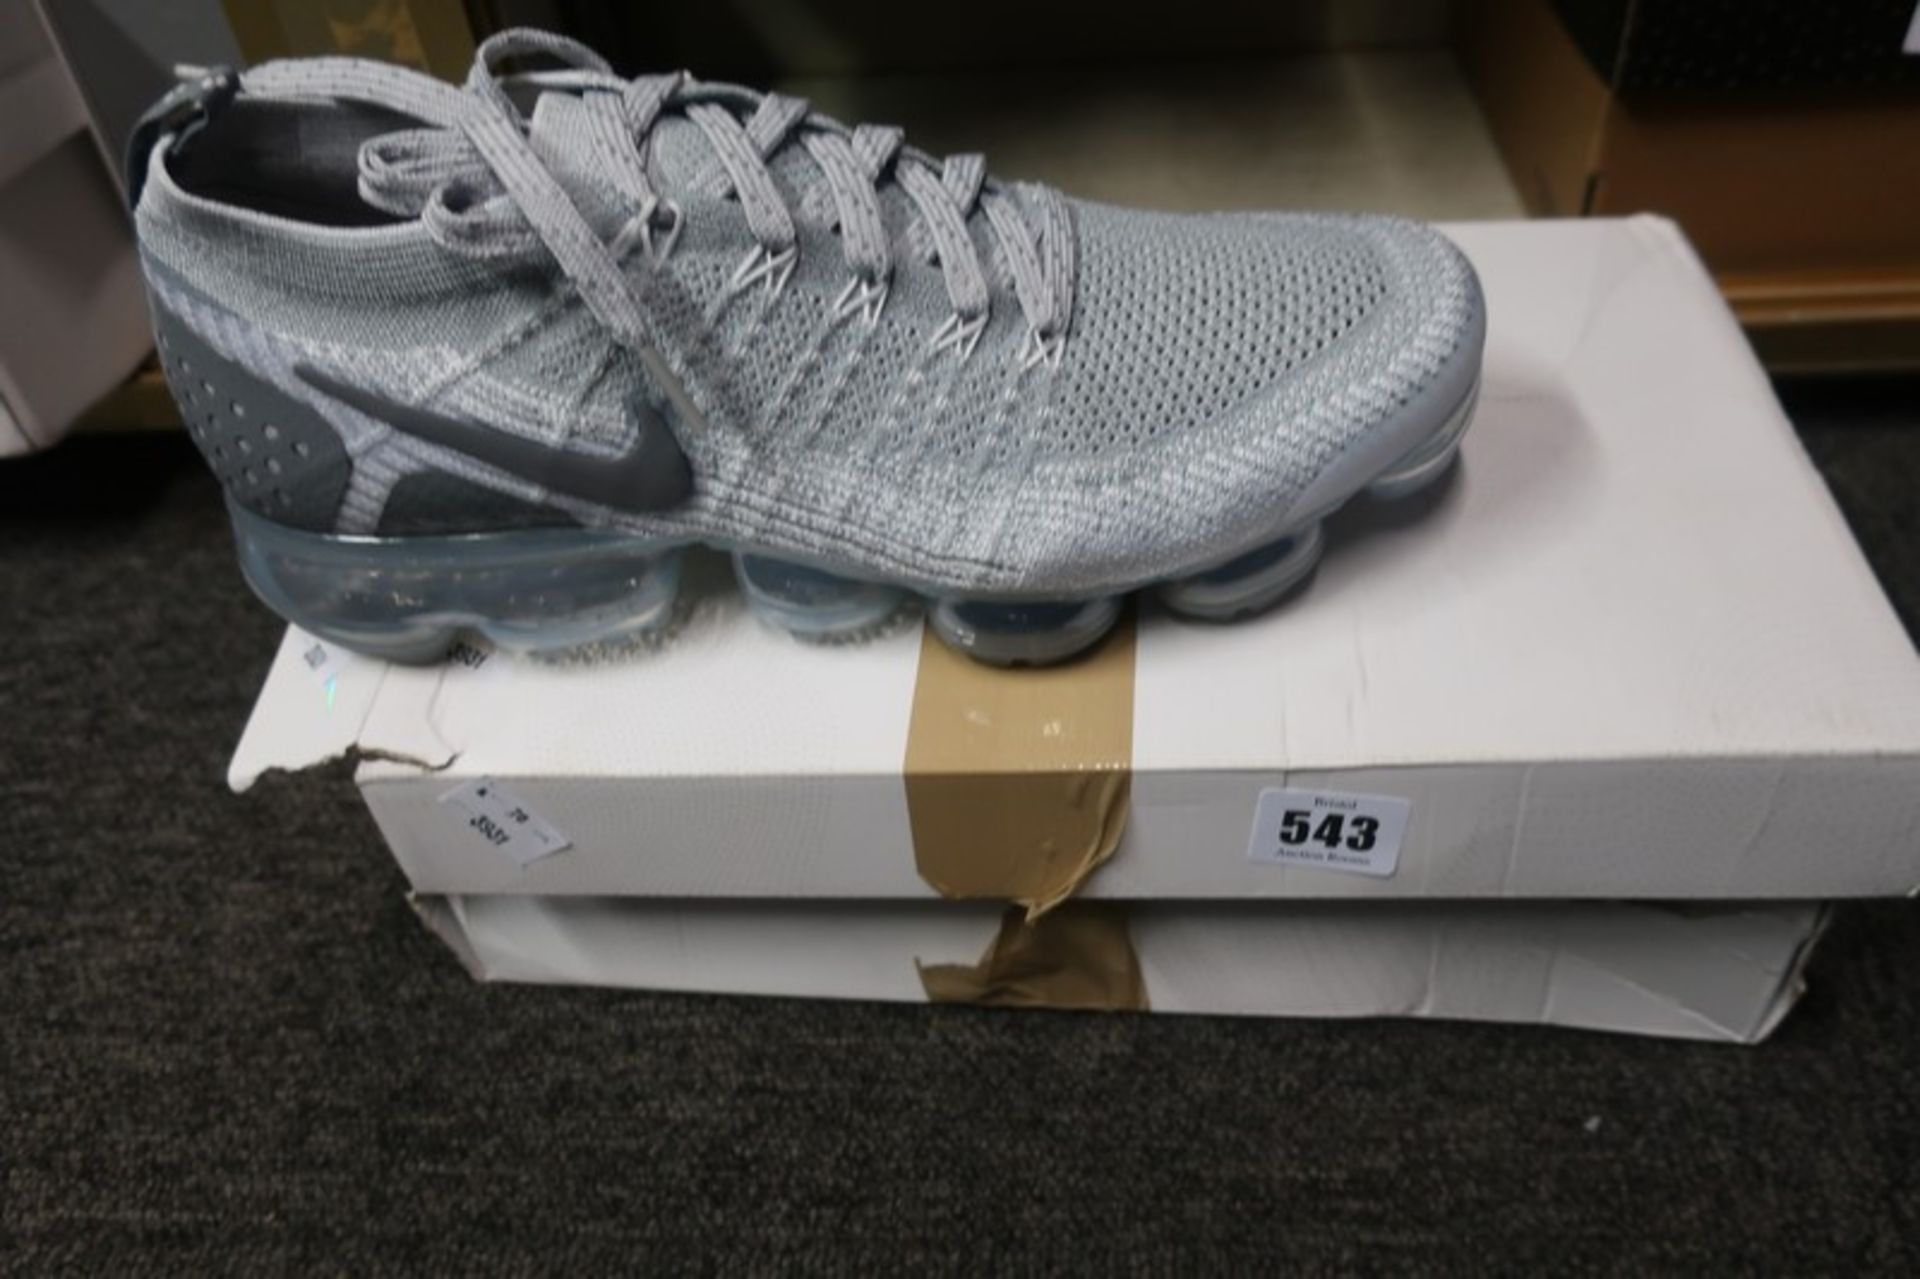 A pair of as new Nike Air Vapormax Flyknit 2 trainers (UK 9).